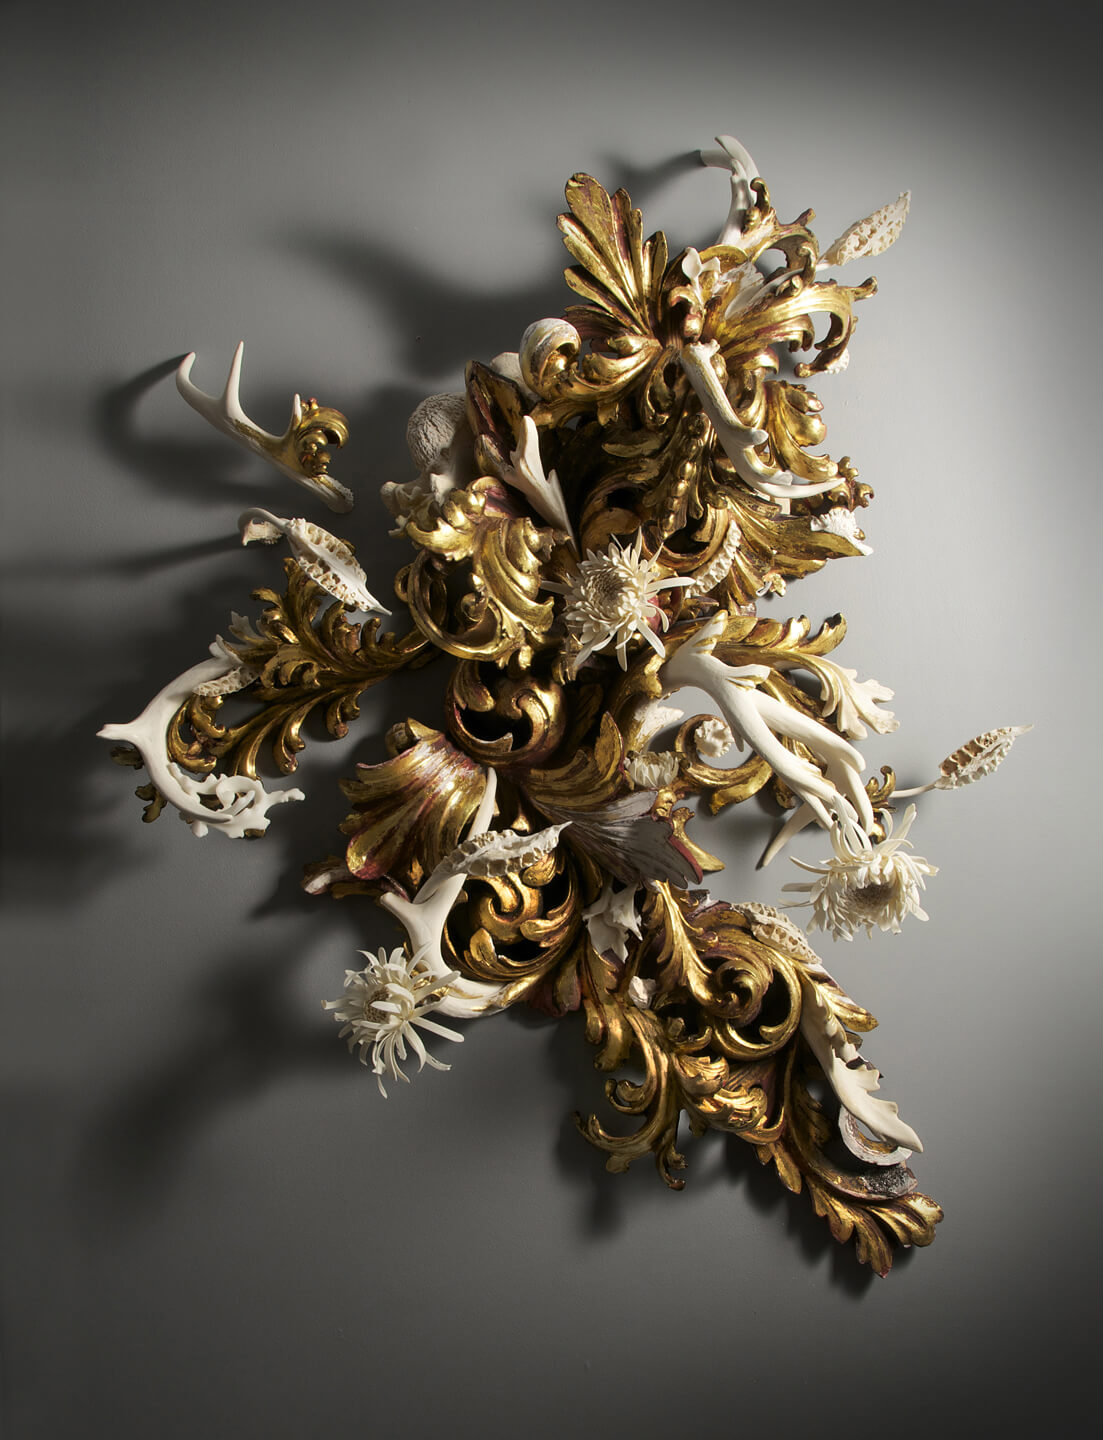 Jennifer Trask - Thrive (SOLD), 2014, found 18th and 20th century frames, gold leaf, bone (deer, cow, python), antlers, fossilized wood, gesso, 23k gold leaf, resin, 46 by 38 by 11 inches